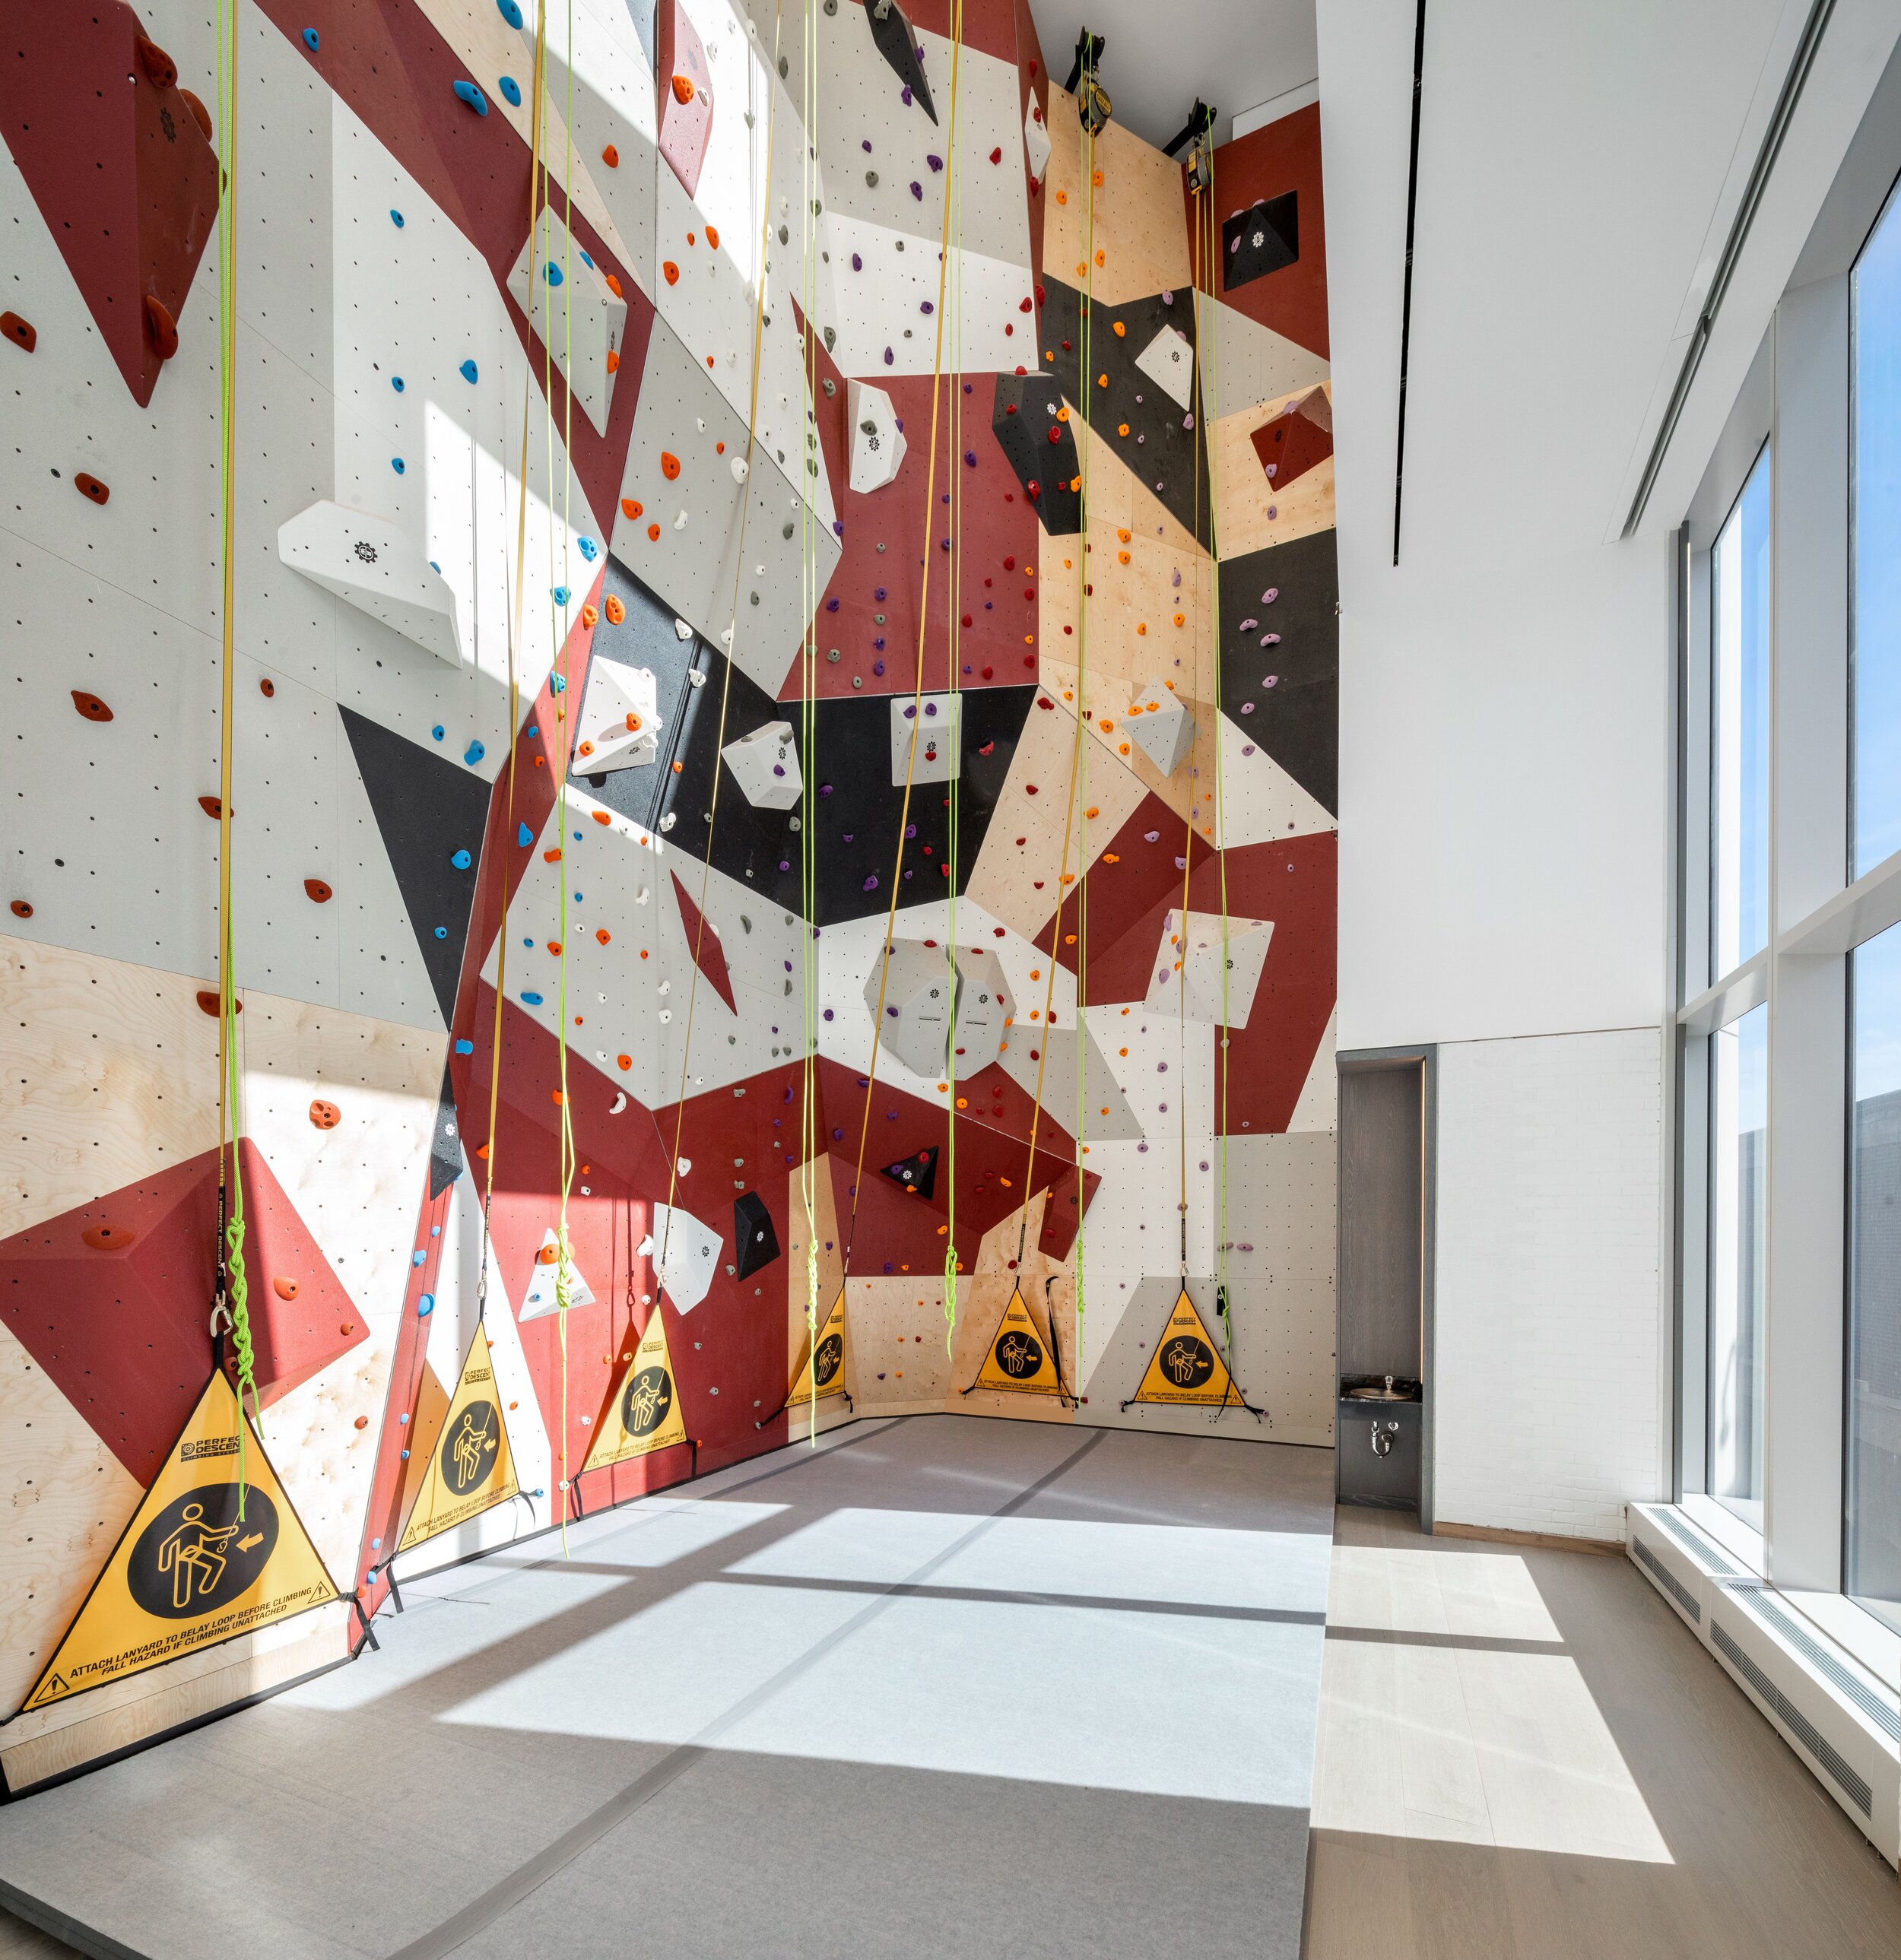   Sport Climbing   As sport climbing makes its Olympic debut this year in Tokyo, residents can be inspired to reach for the ceiling at home at  Brooklyn Point . Offering the highest rock climbing wall at 35 feet in any private residential building in